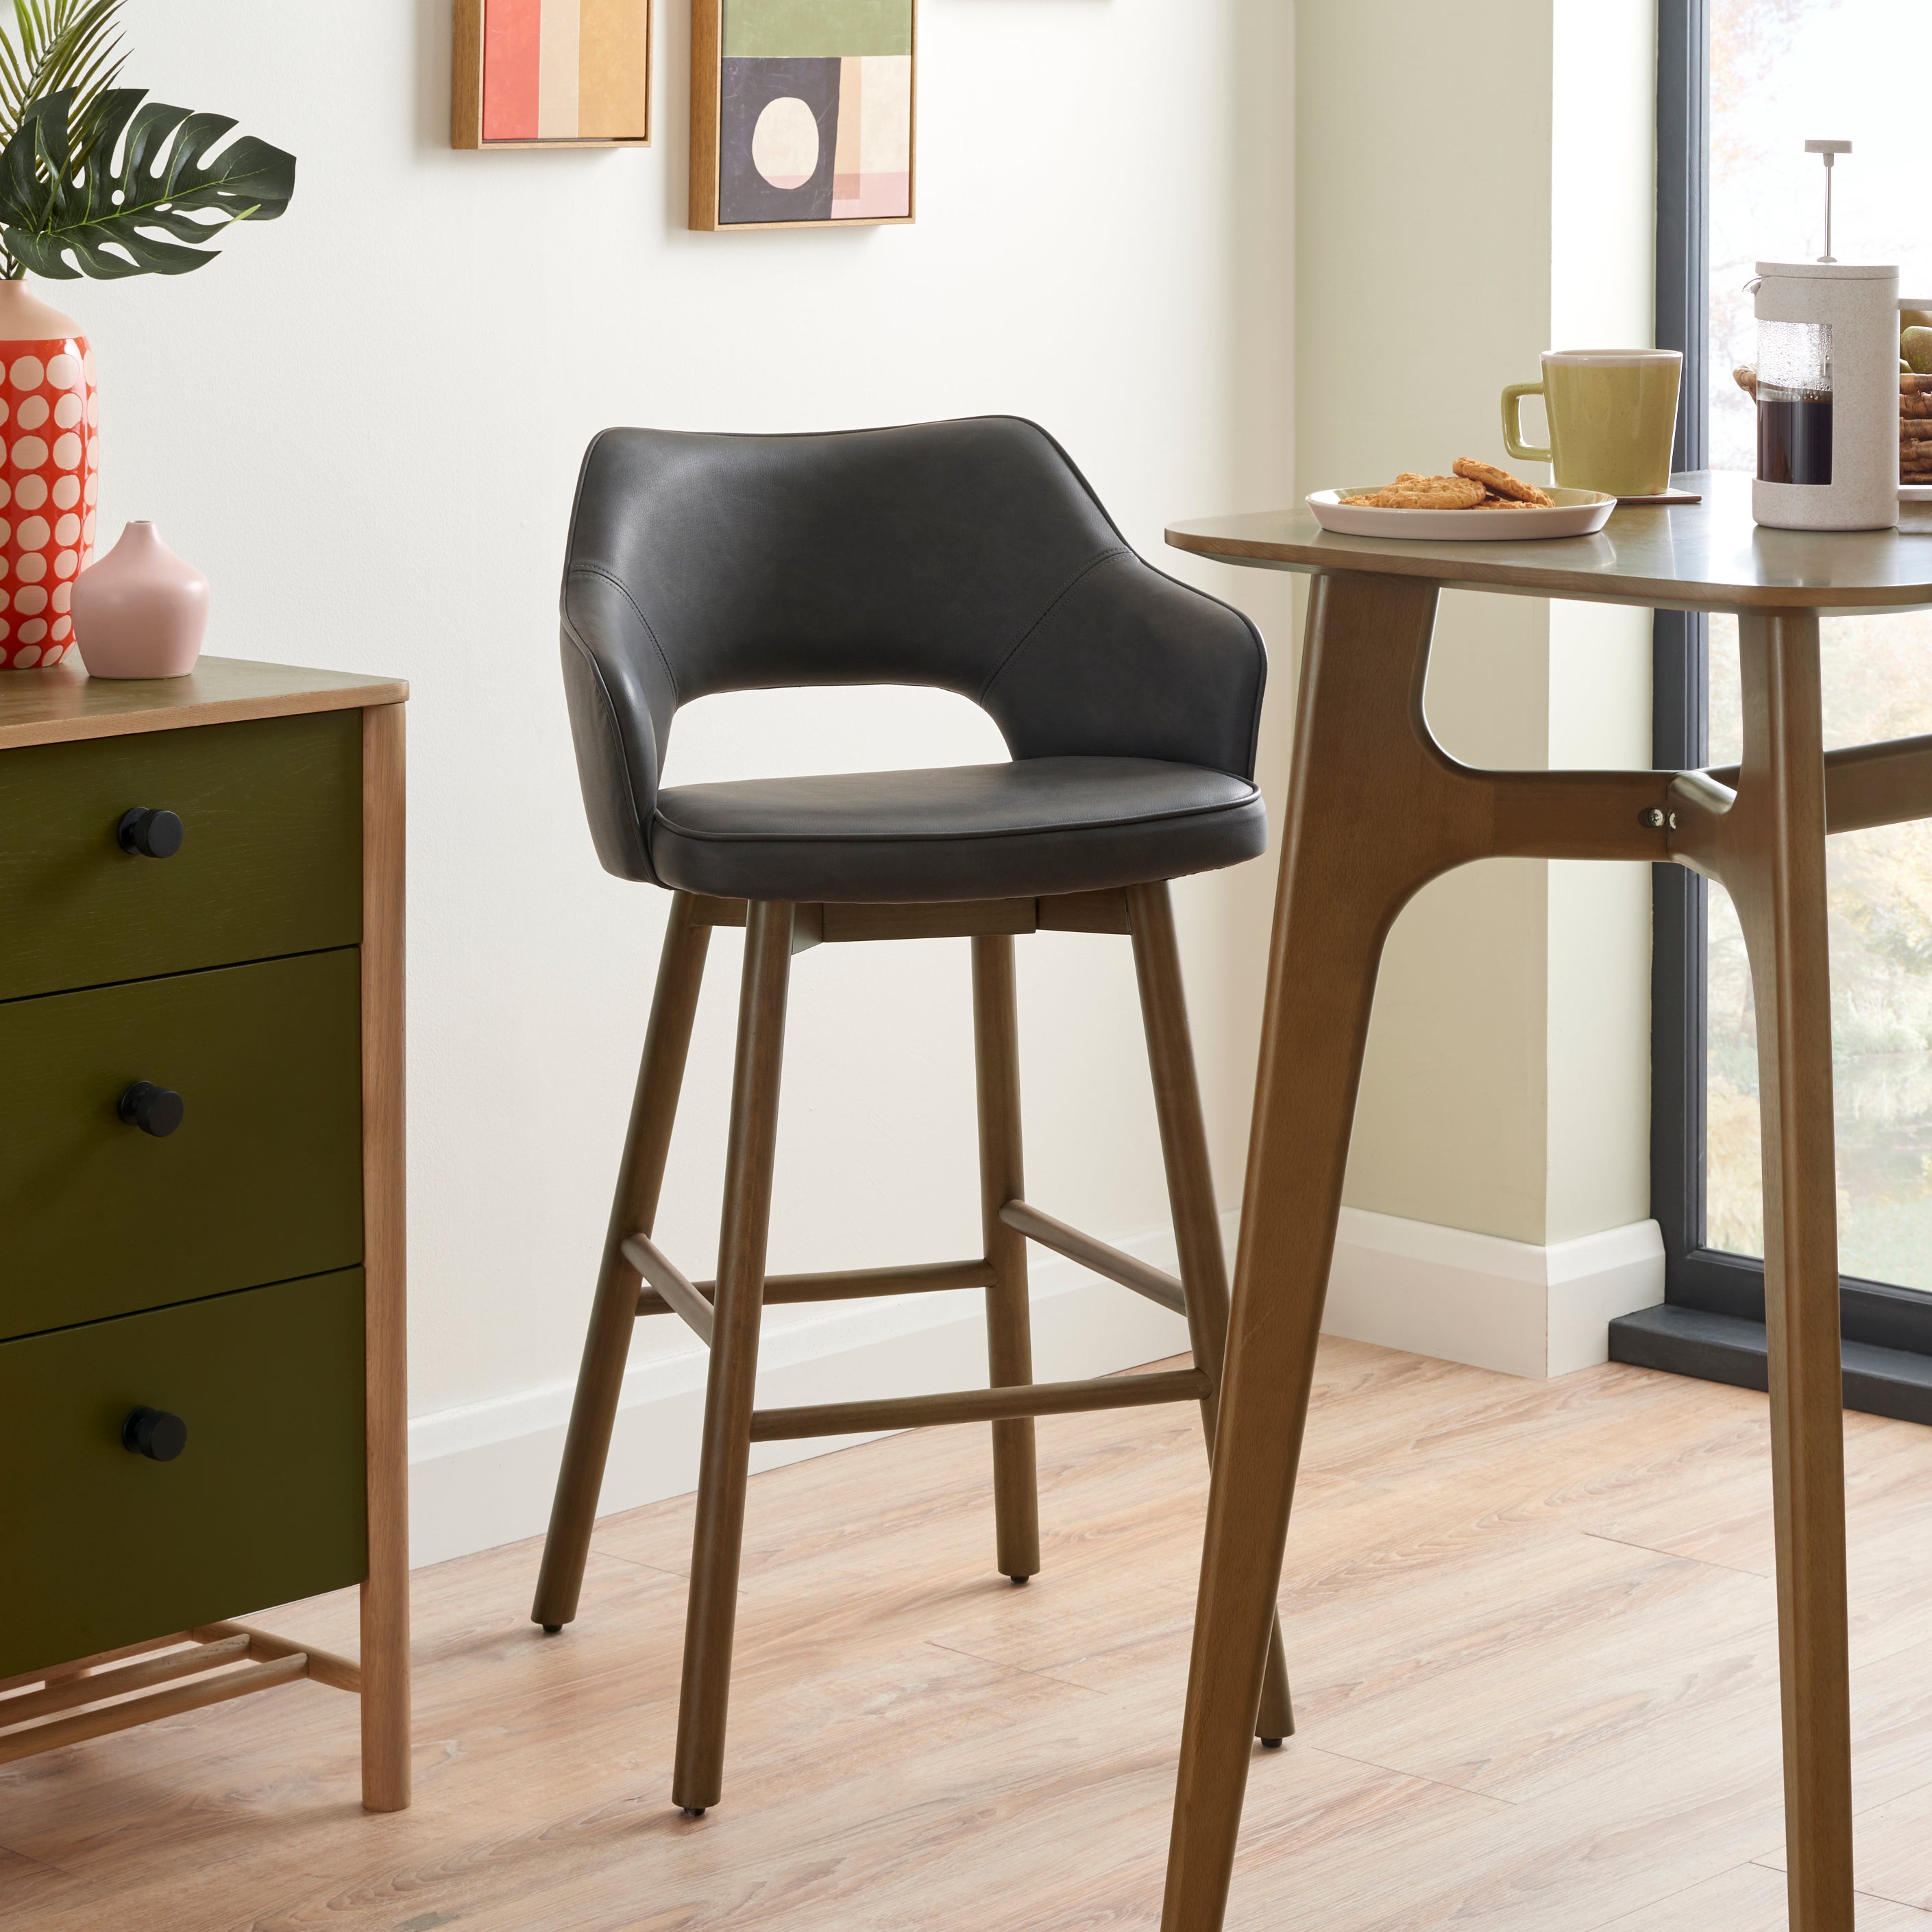 Elements Bar Height Stools, Black Faux Leather